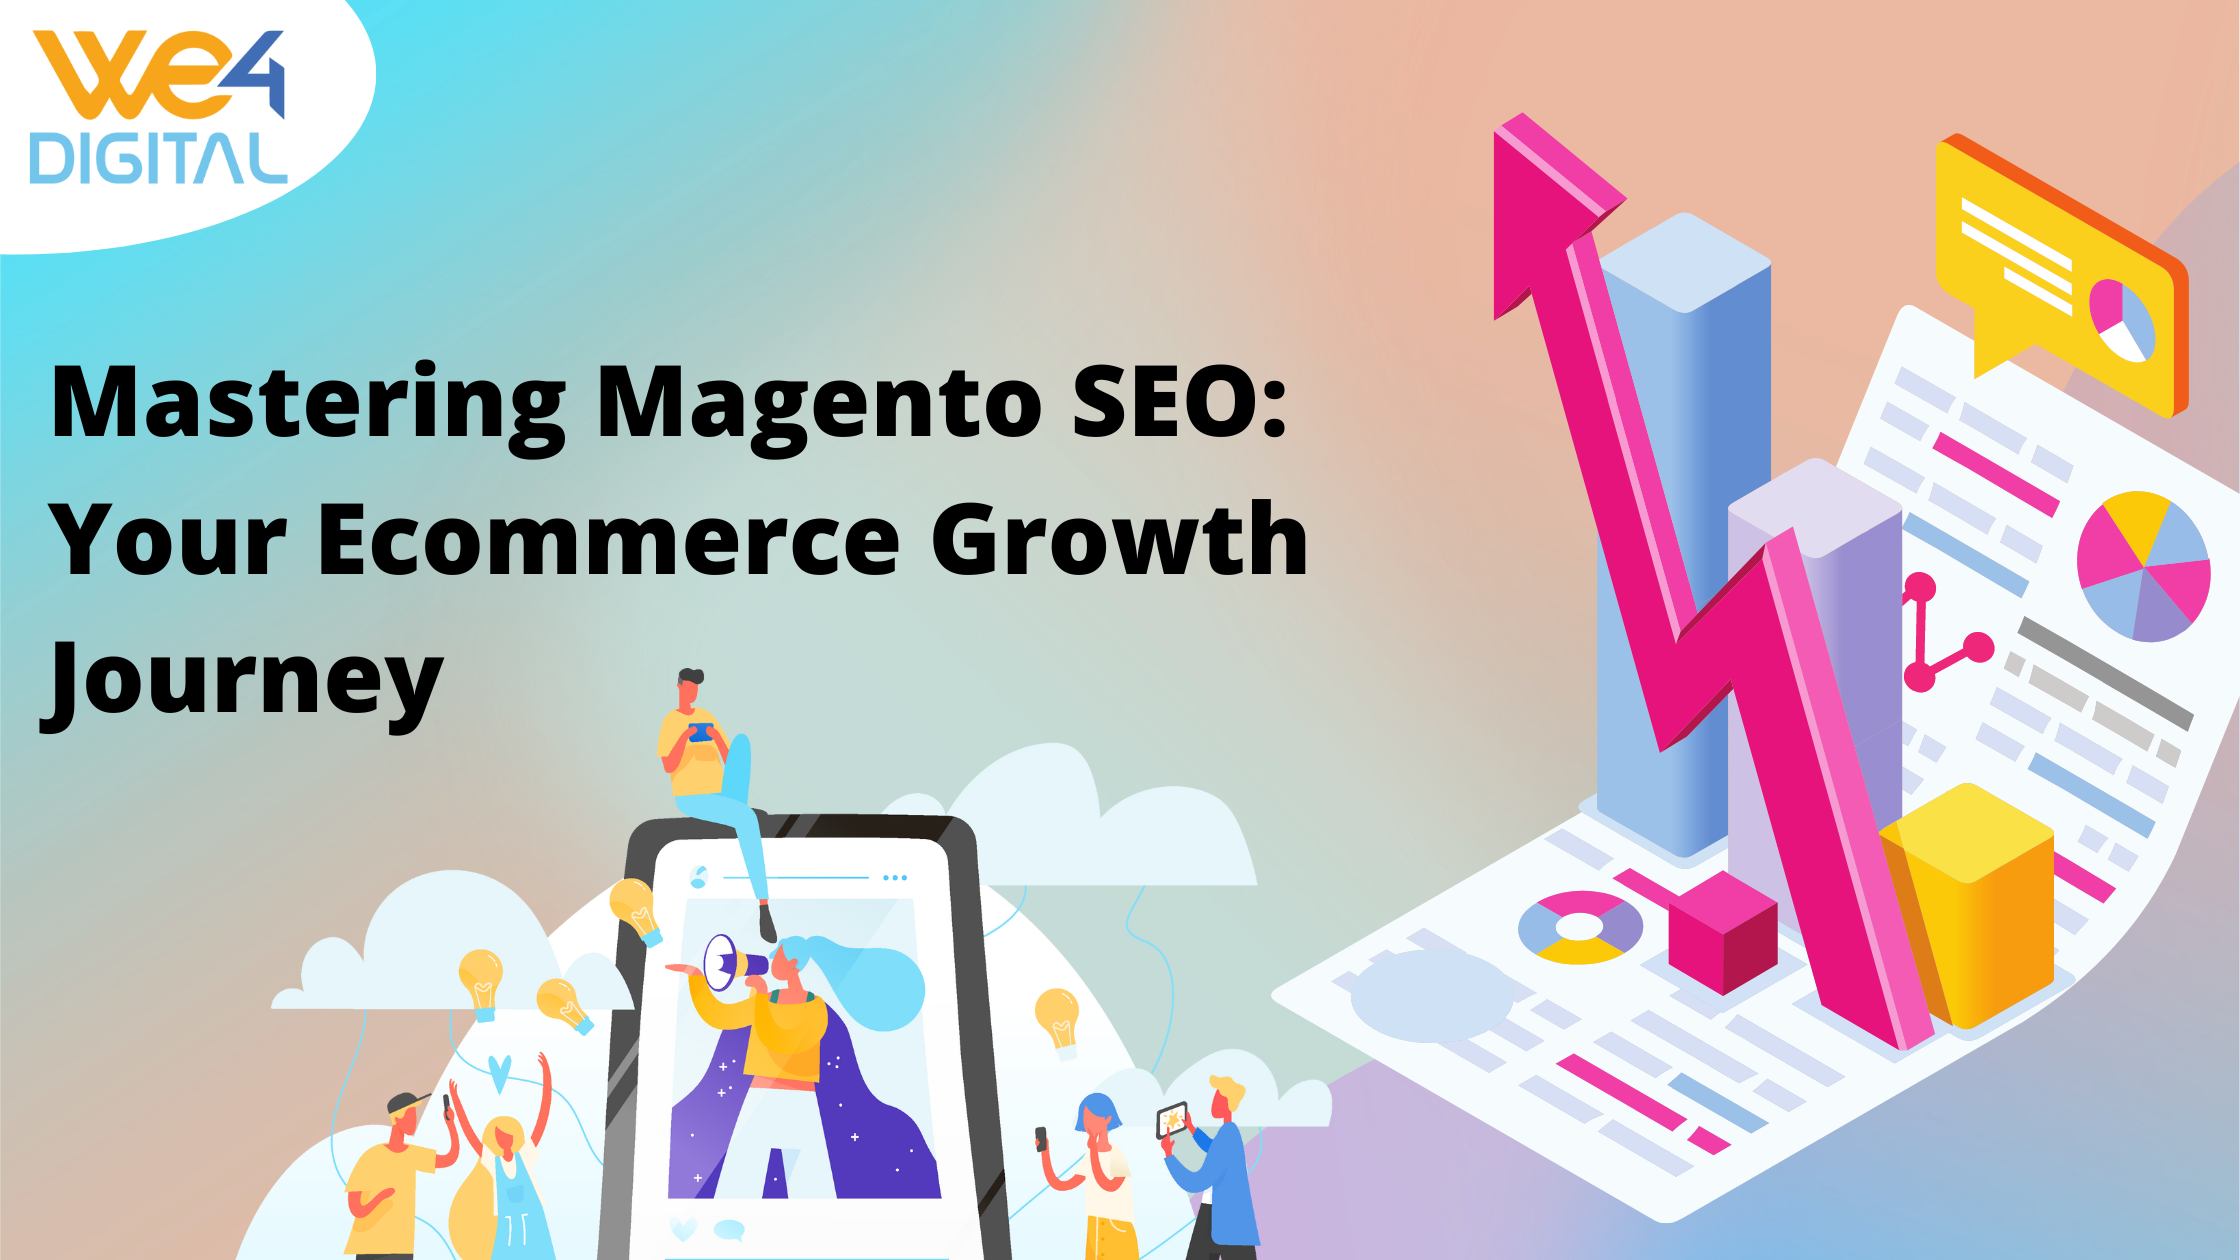 Mastering Magento SEO: Accelerate Your Ecommerce Growth Journey - we4digital